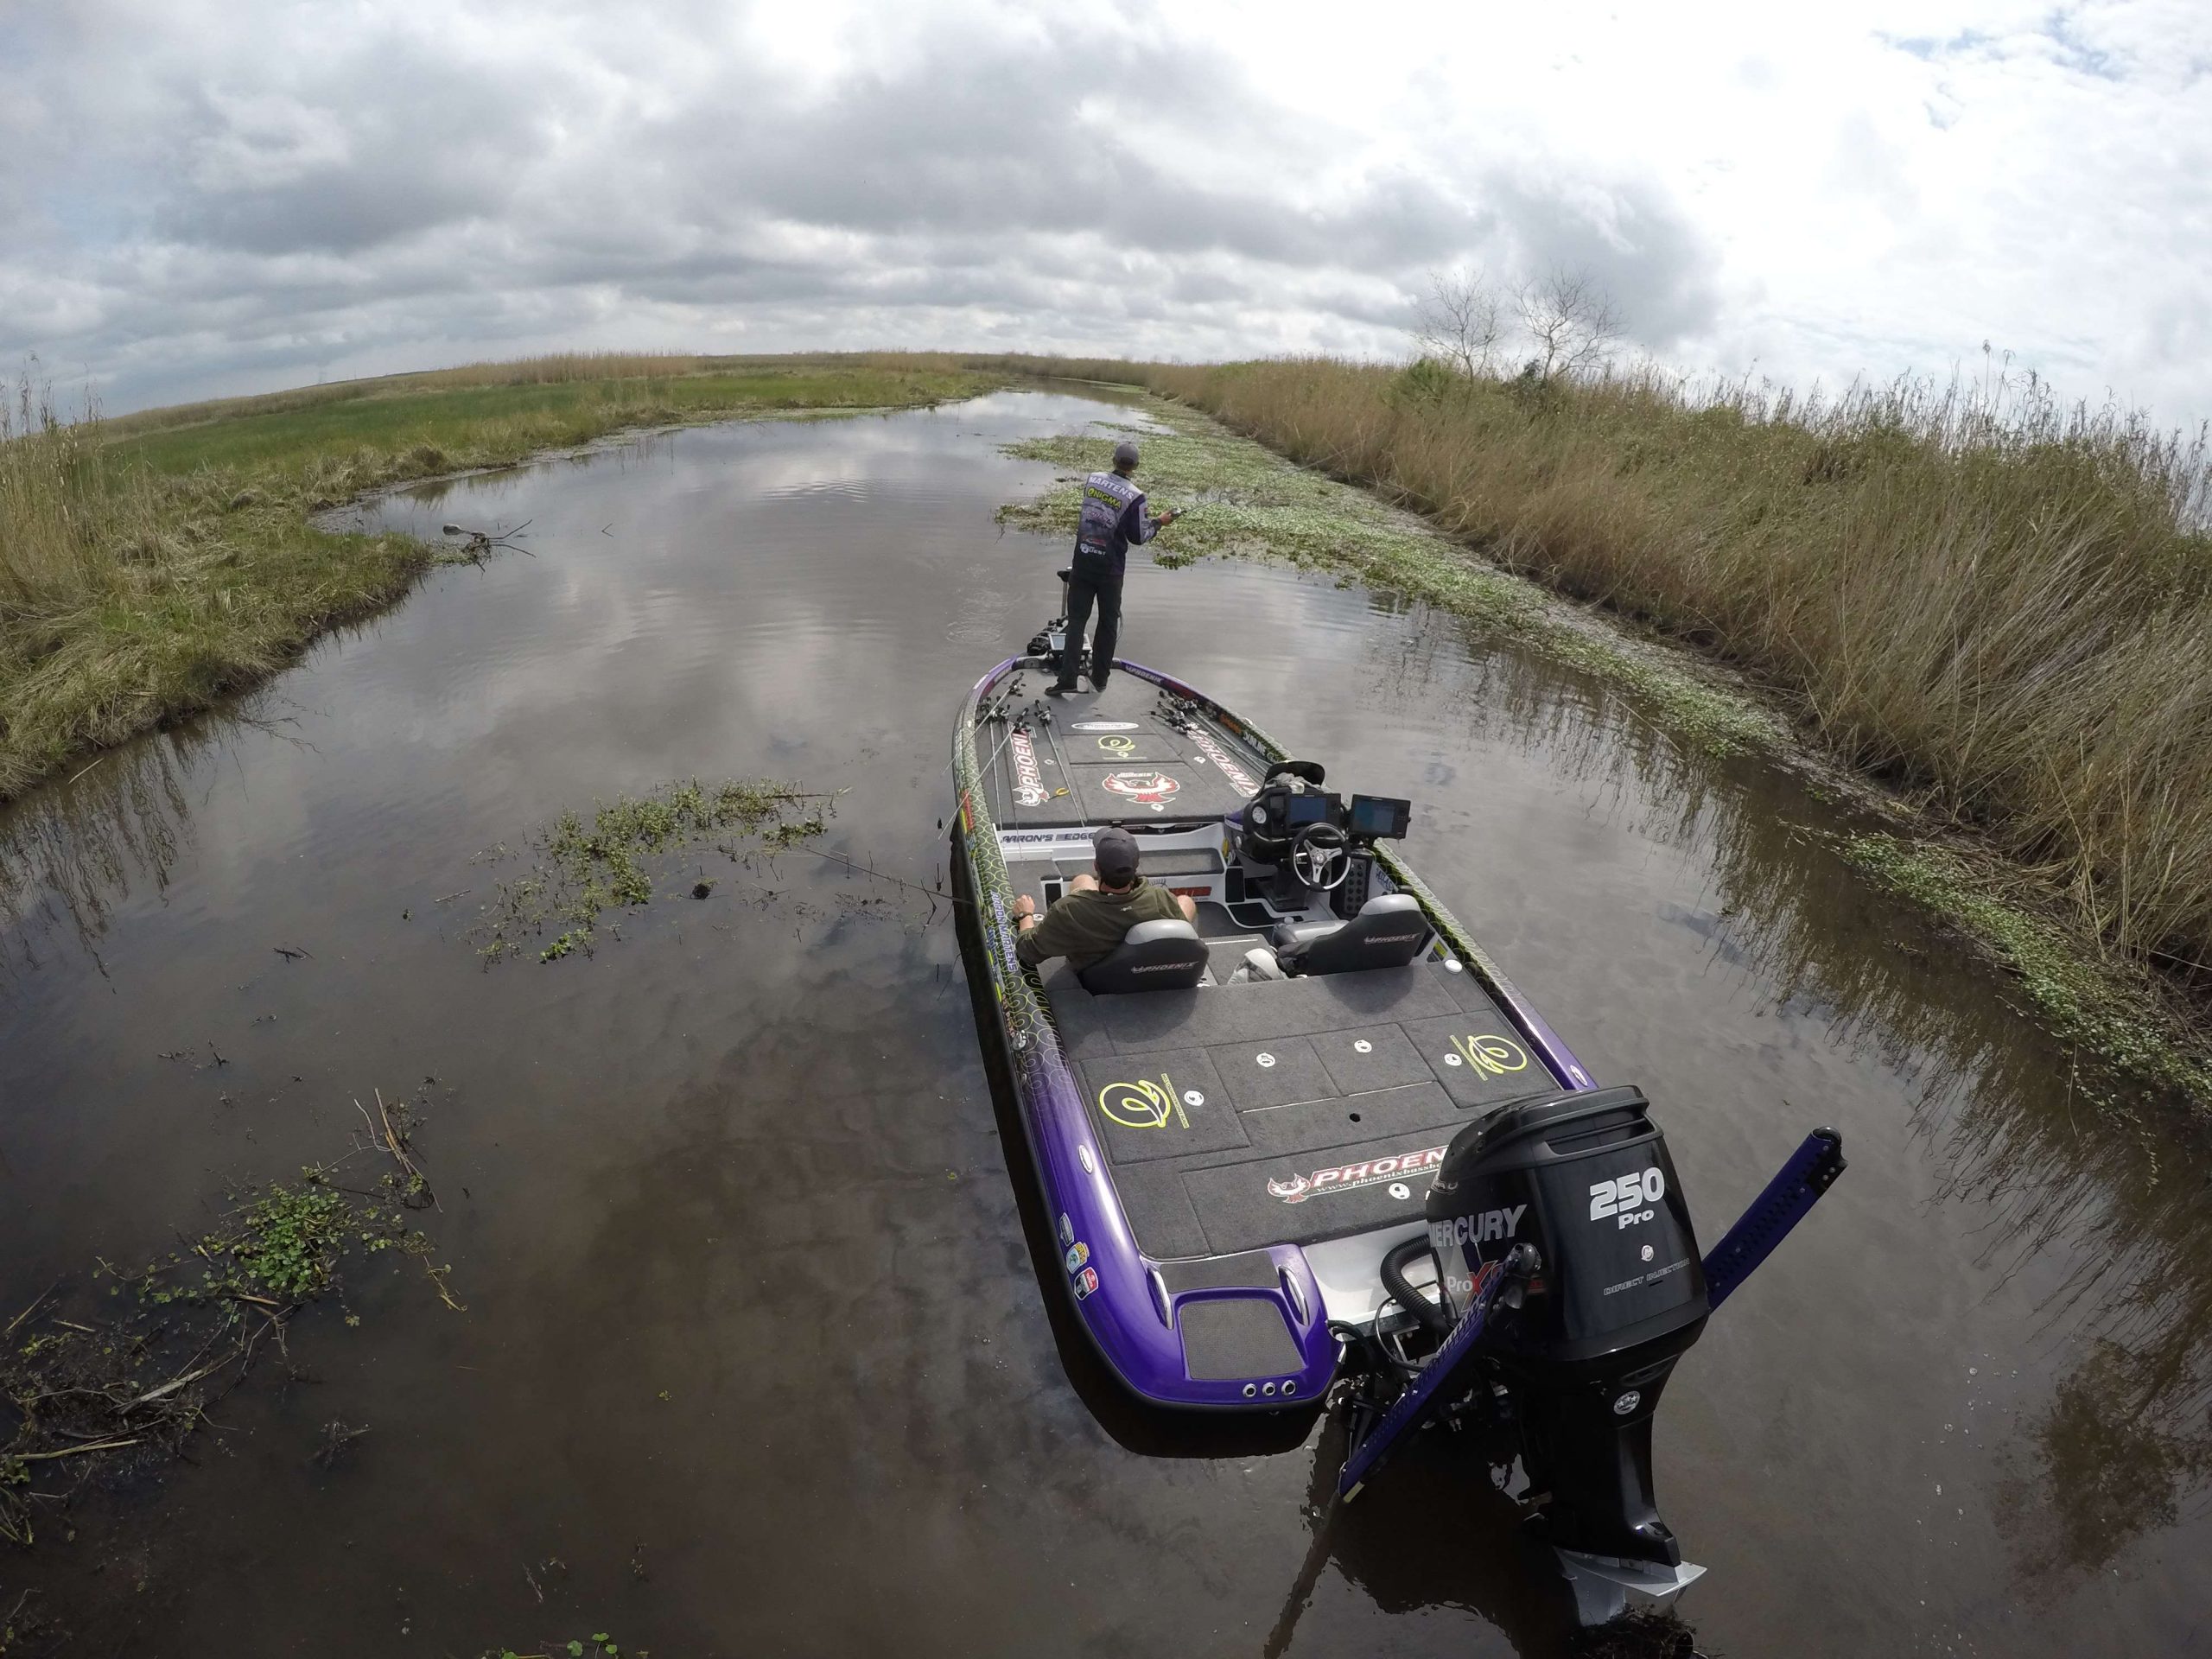 Shaye Baker spent some time with Aaron Martens during Day 1 of the Bassmaster Elite at Sabine River. Here's a look at the 2013 Toyota Angler of the Year working hard on the Sabine.